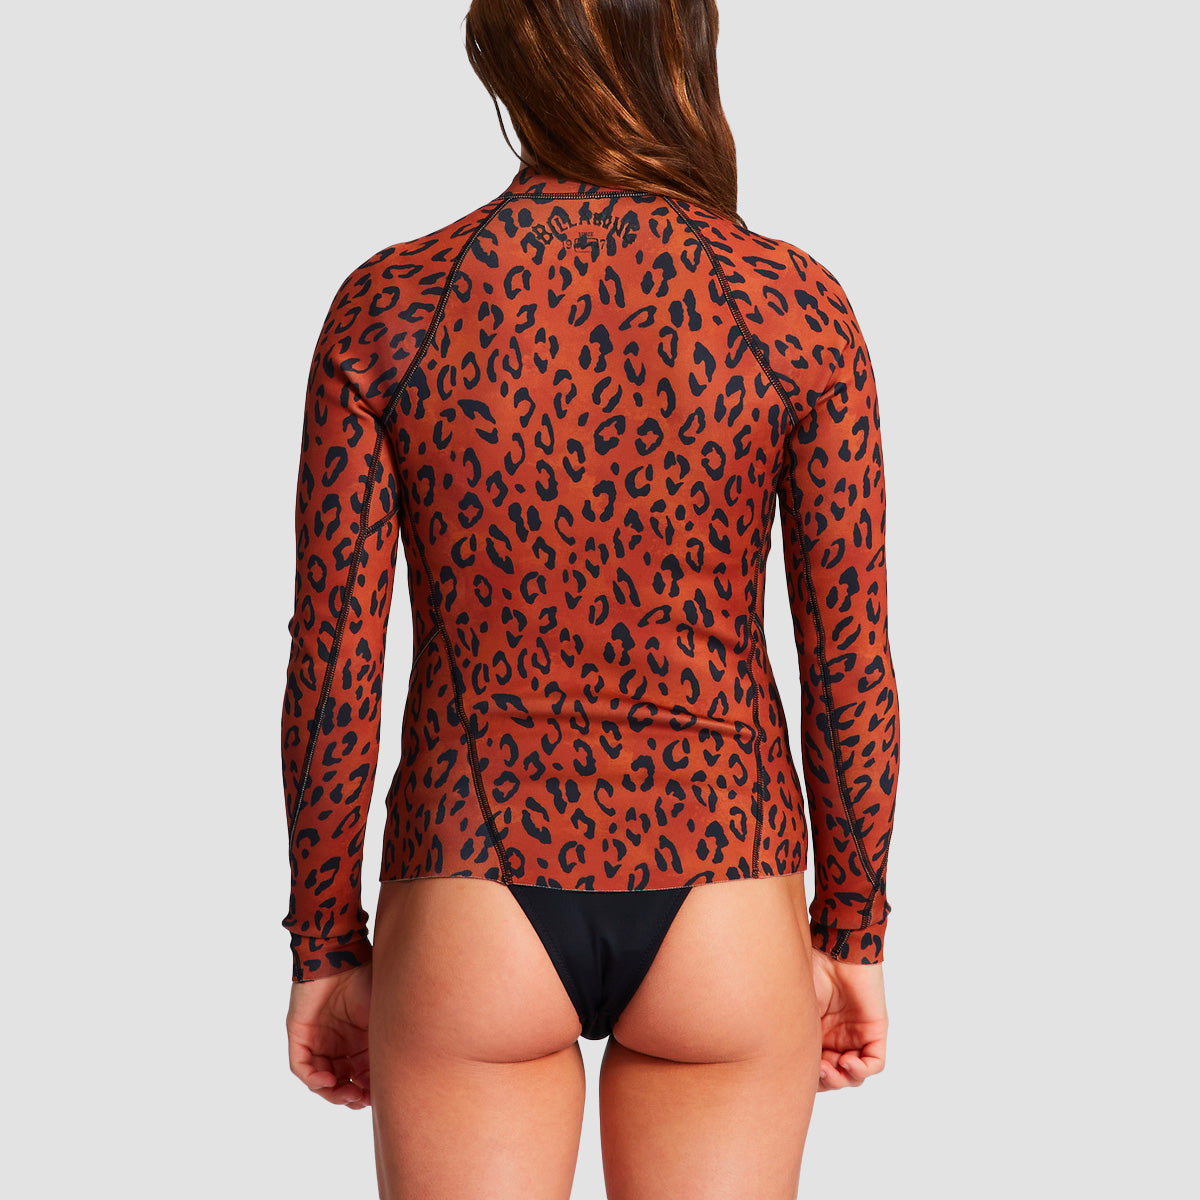 Billabong Peeky 1mm Wetsuit Top Spotted - Womens